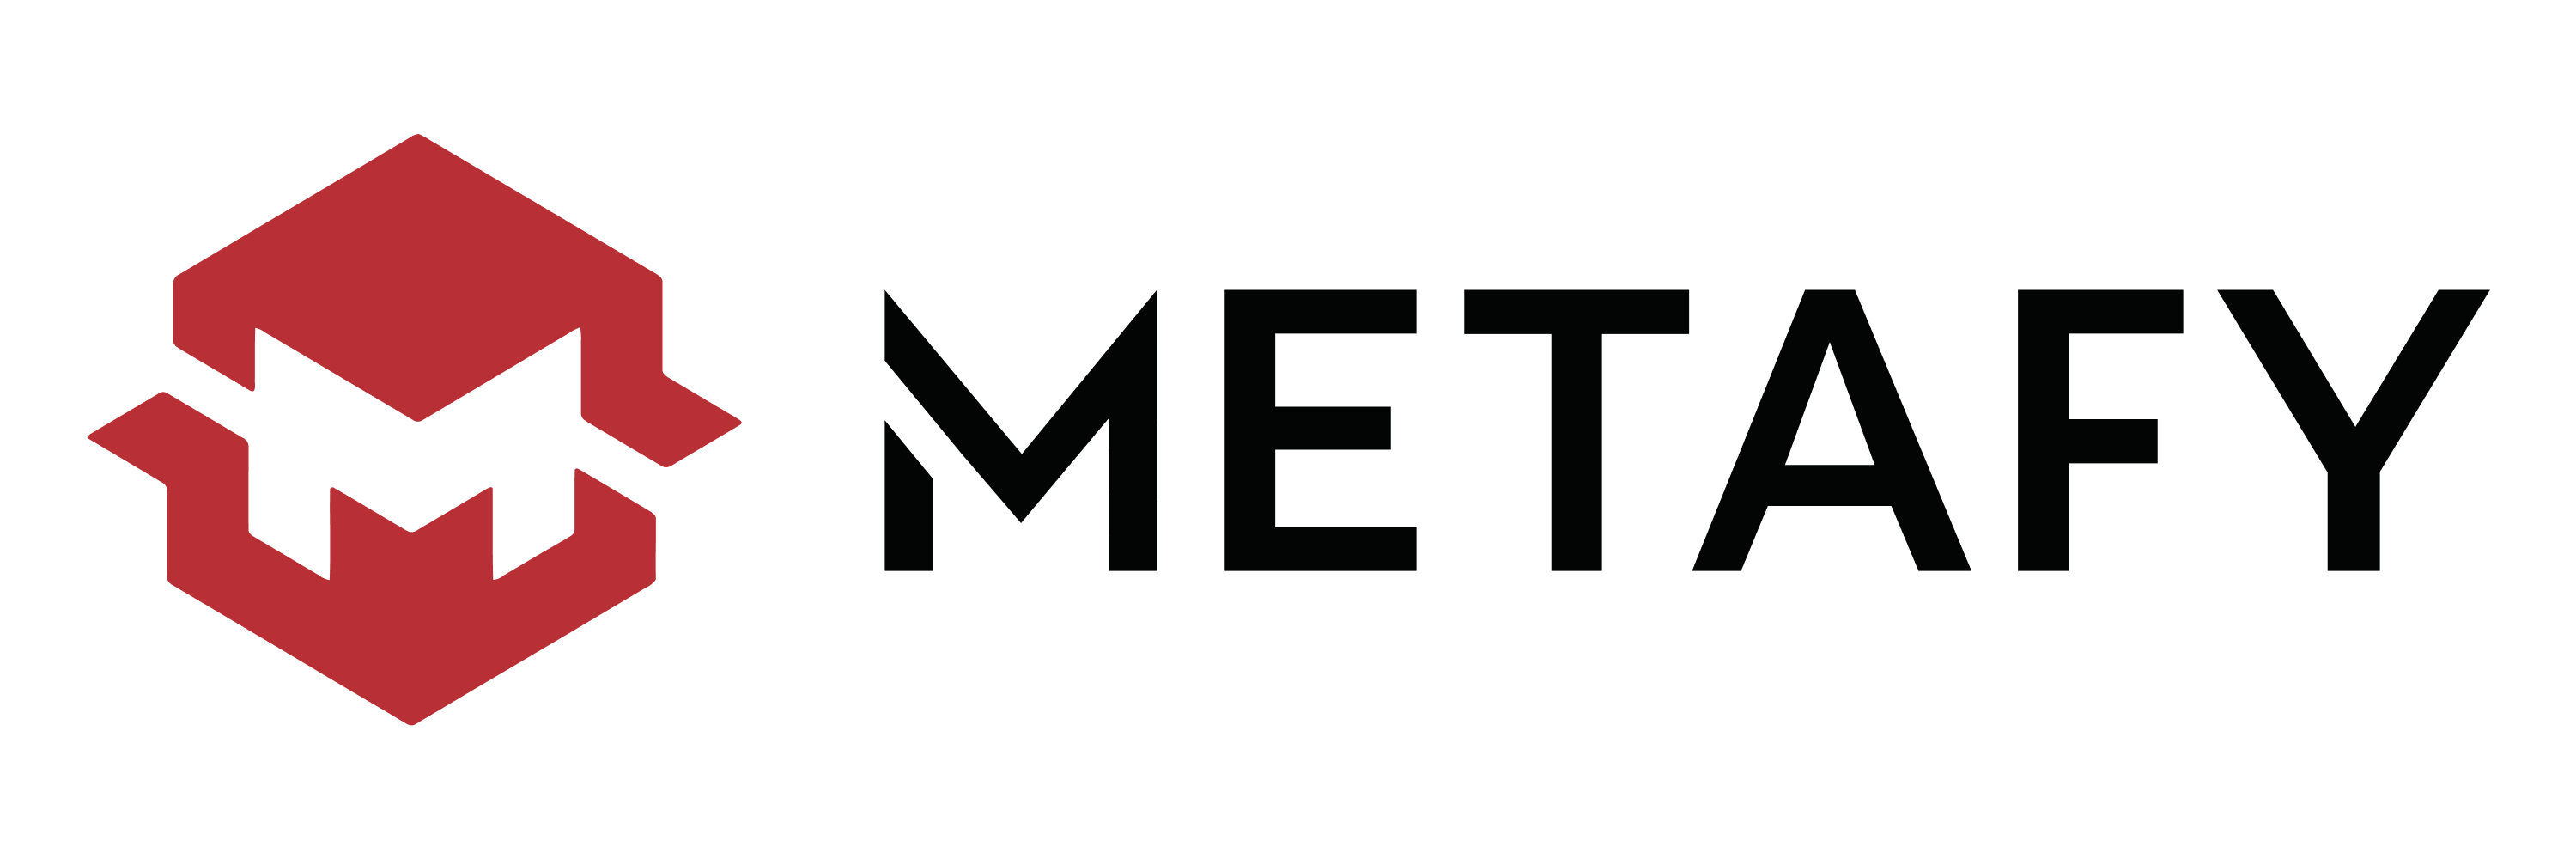 Metafy Secures $3M in Seed Funding, Launches Platform for Gamers